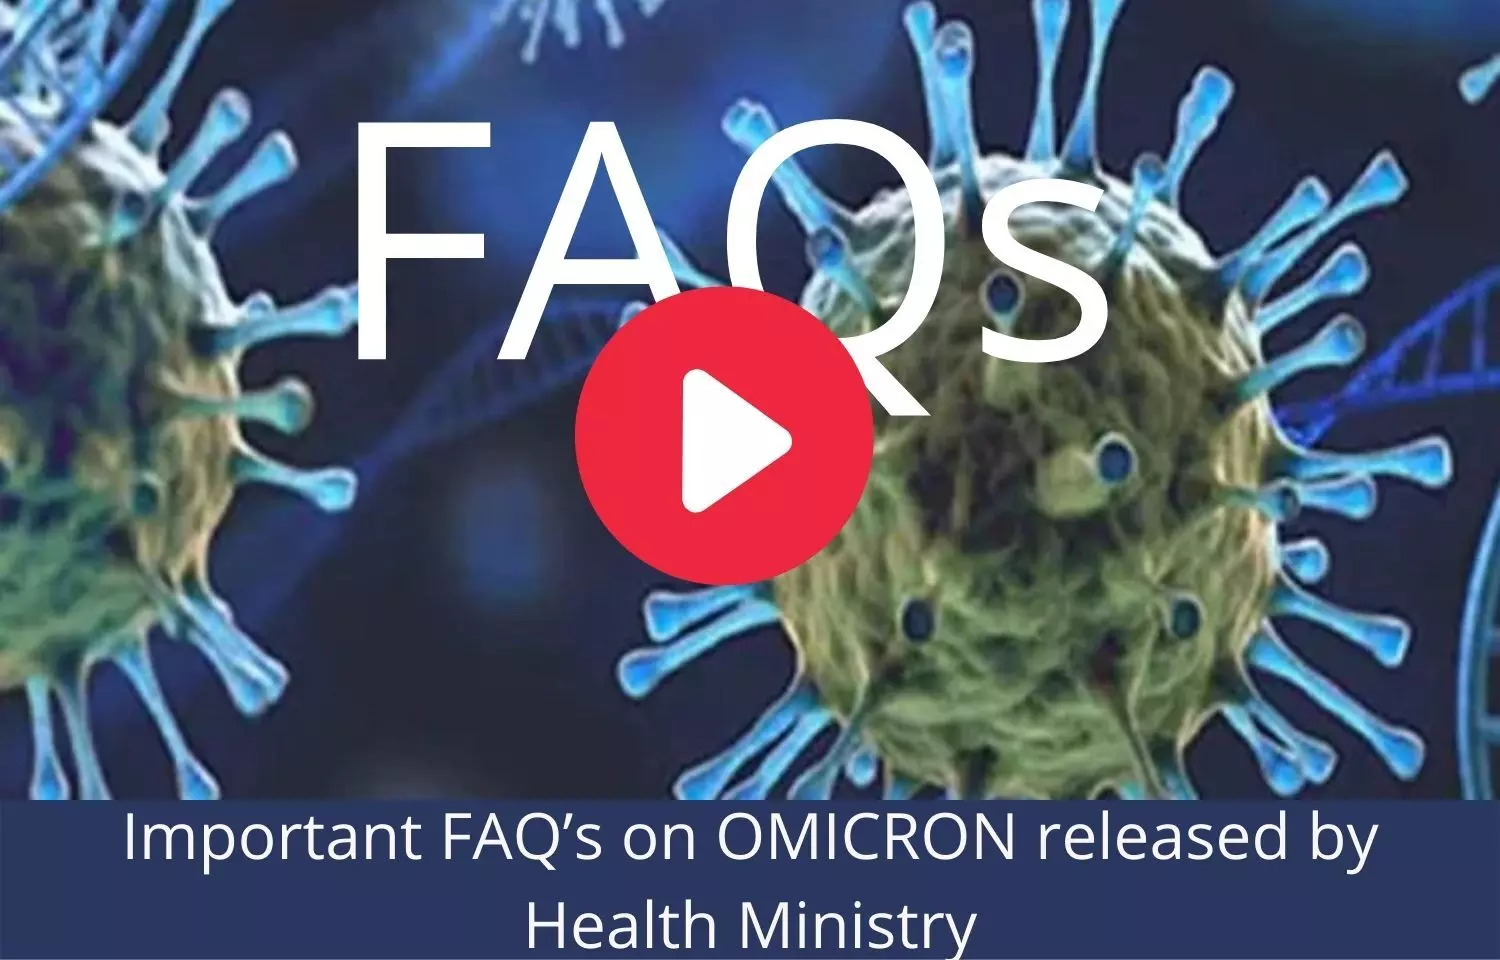 Important FAQs on Omicron released by Health Ministry